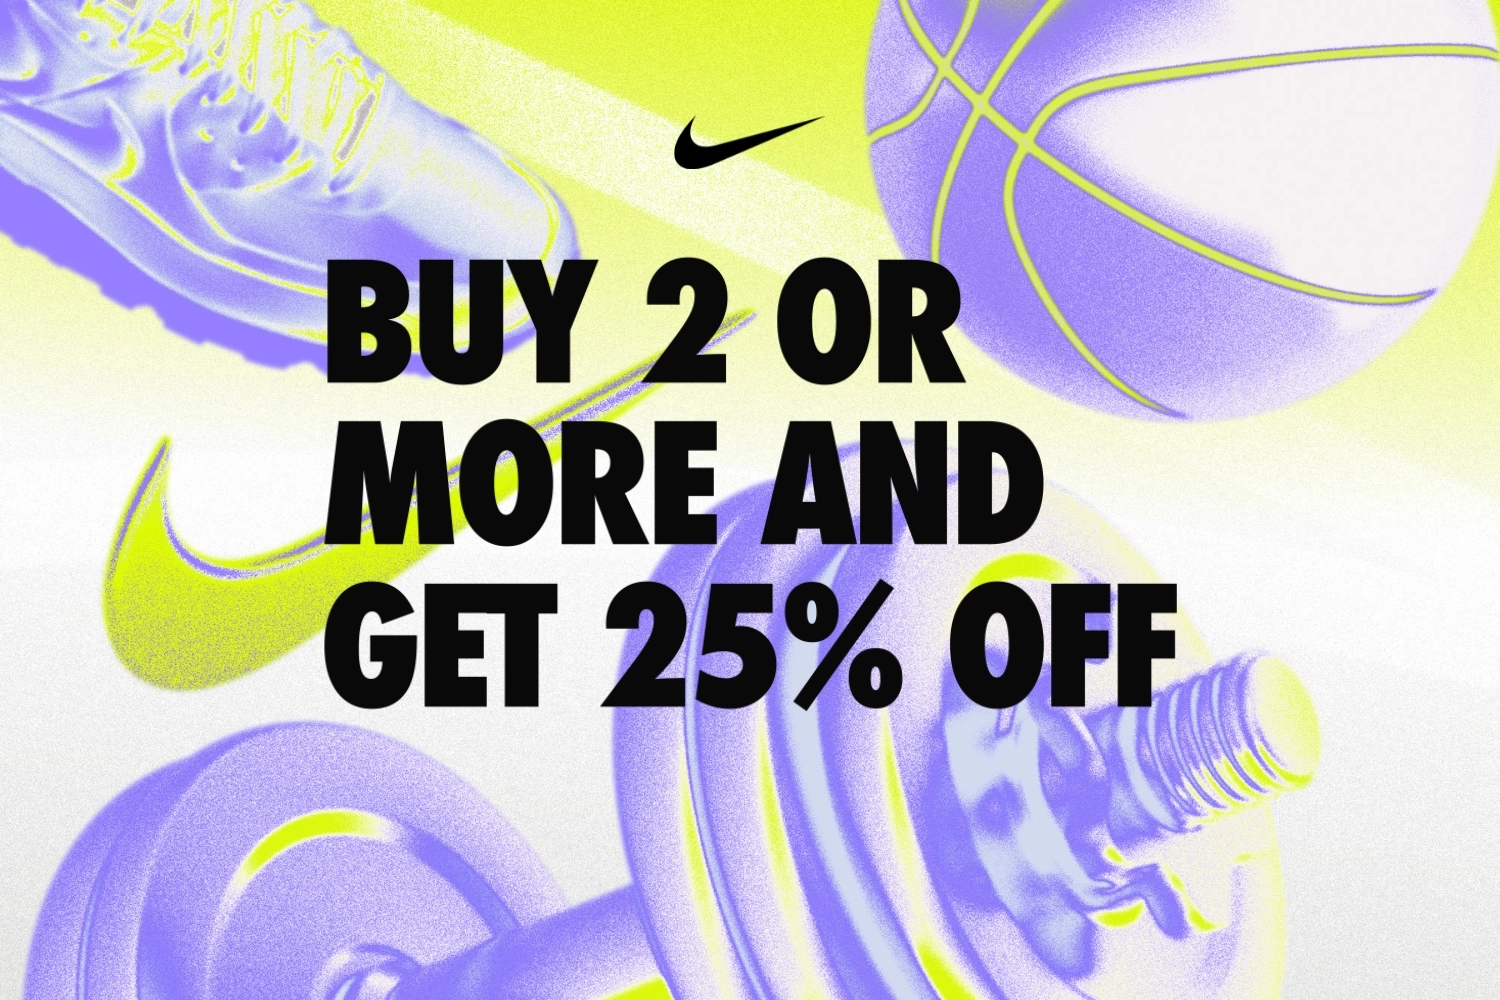 Bundle promo at Nike with 25% discount